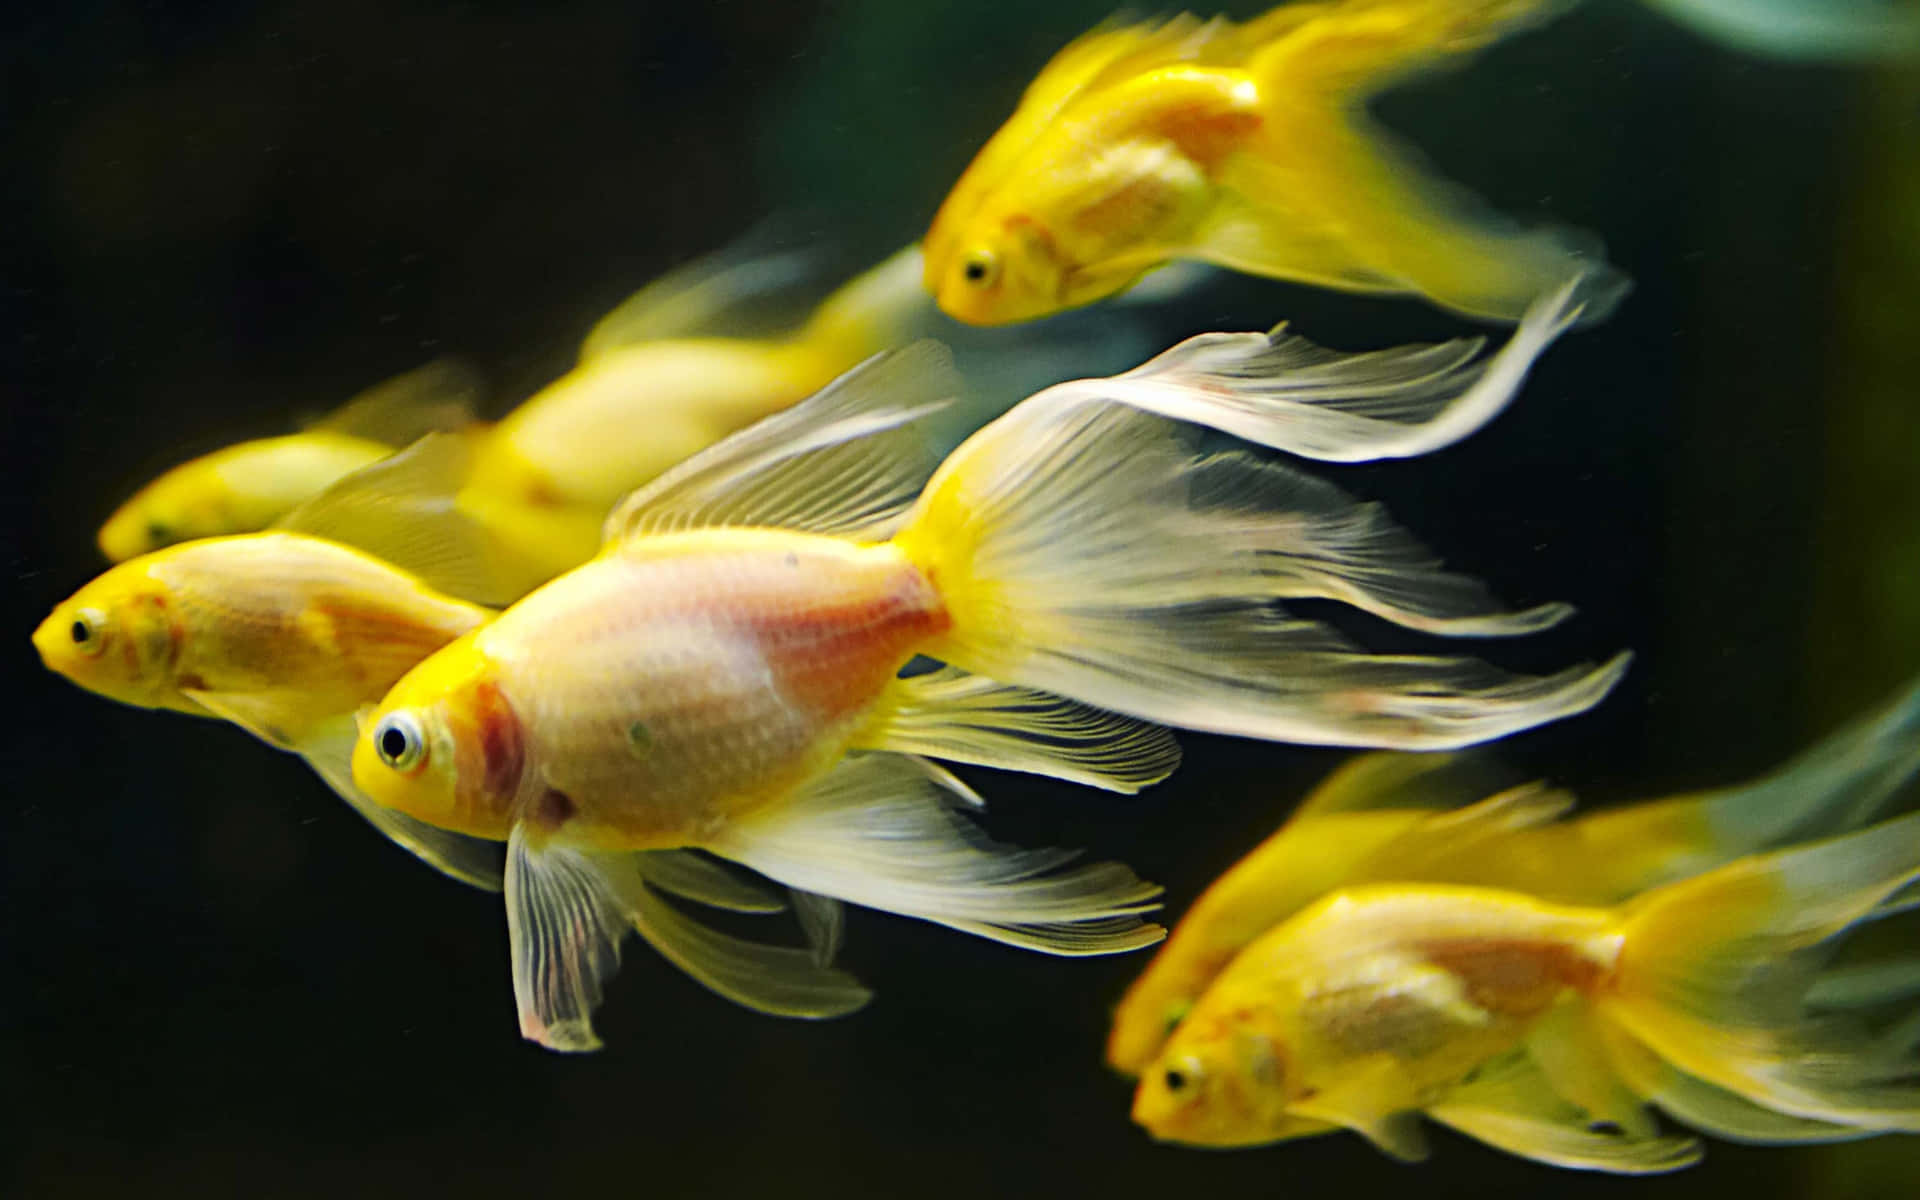 A school of brilliantly-colored goldfish swimming in a pond